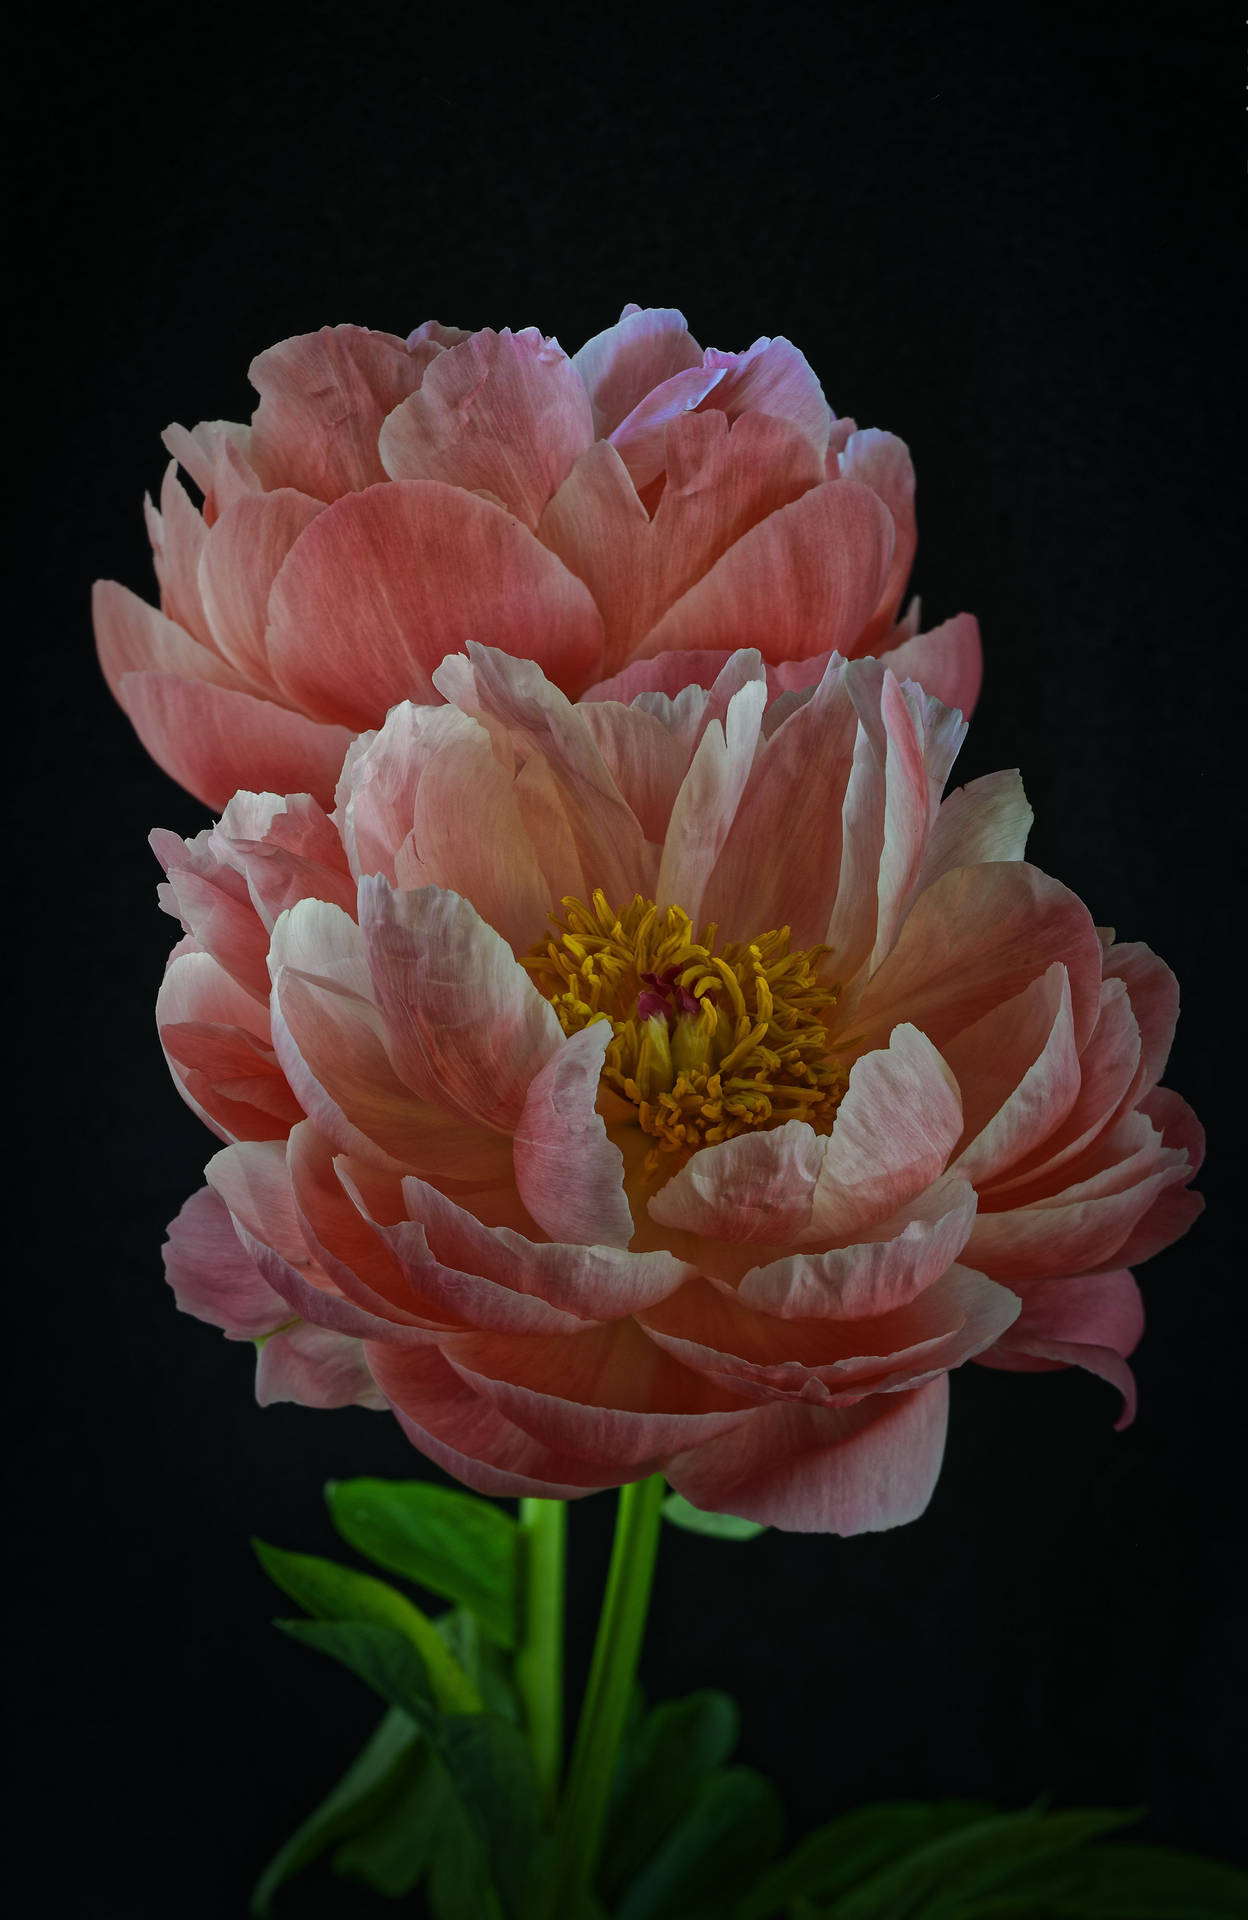 Peony Flowers With Black Background Wallpaper